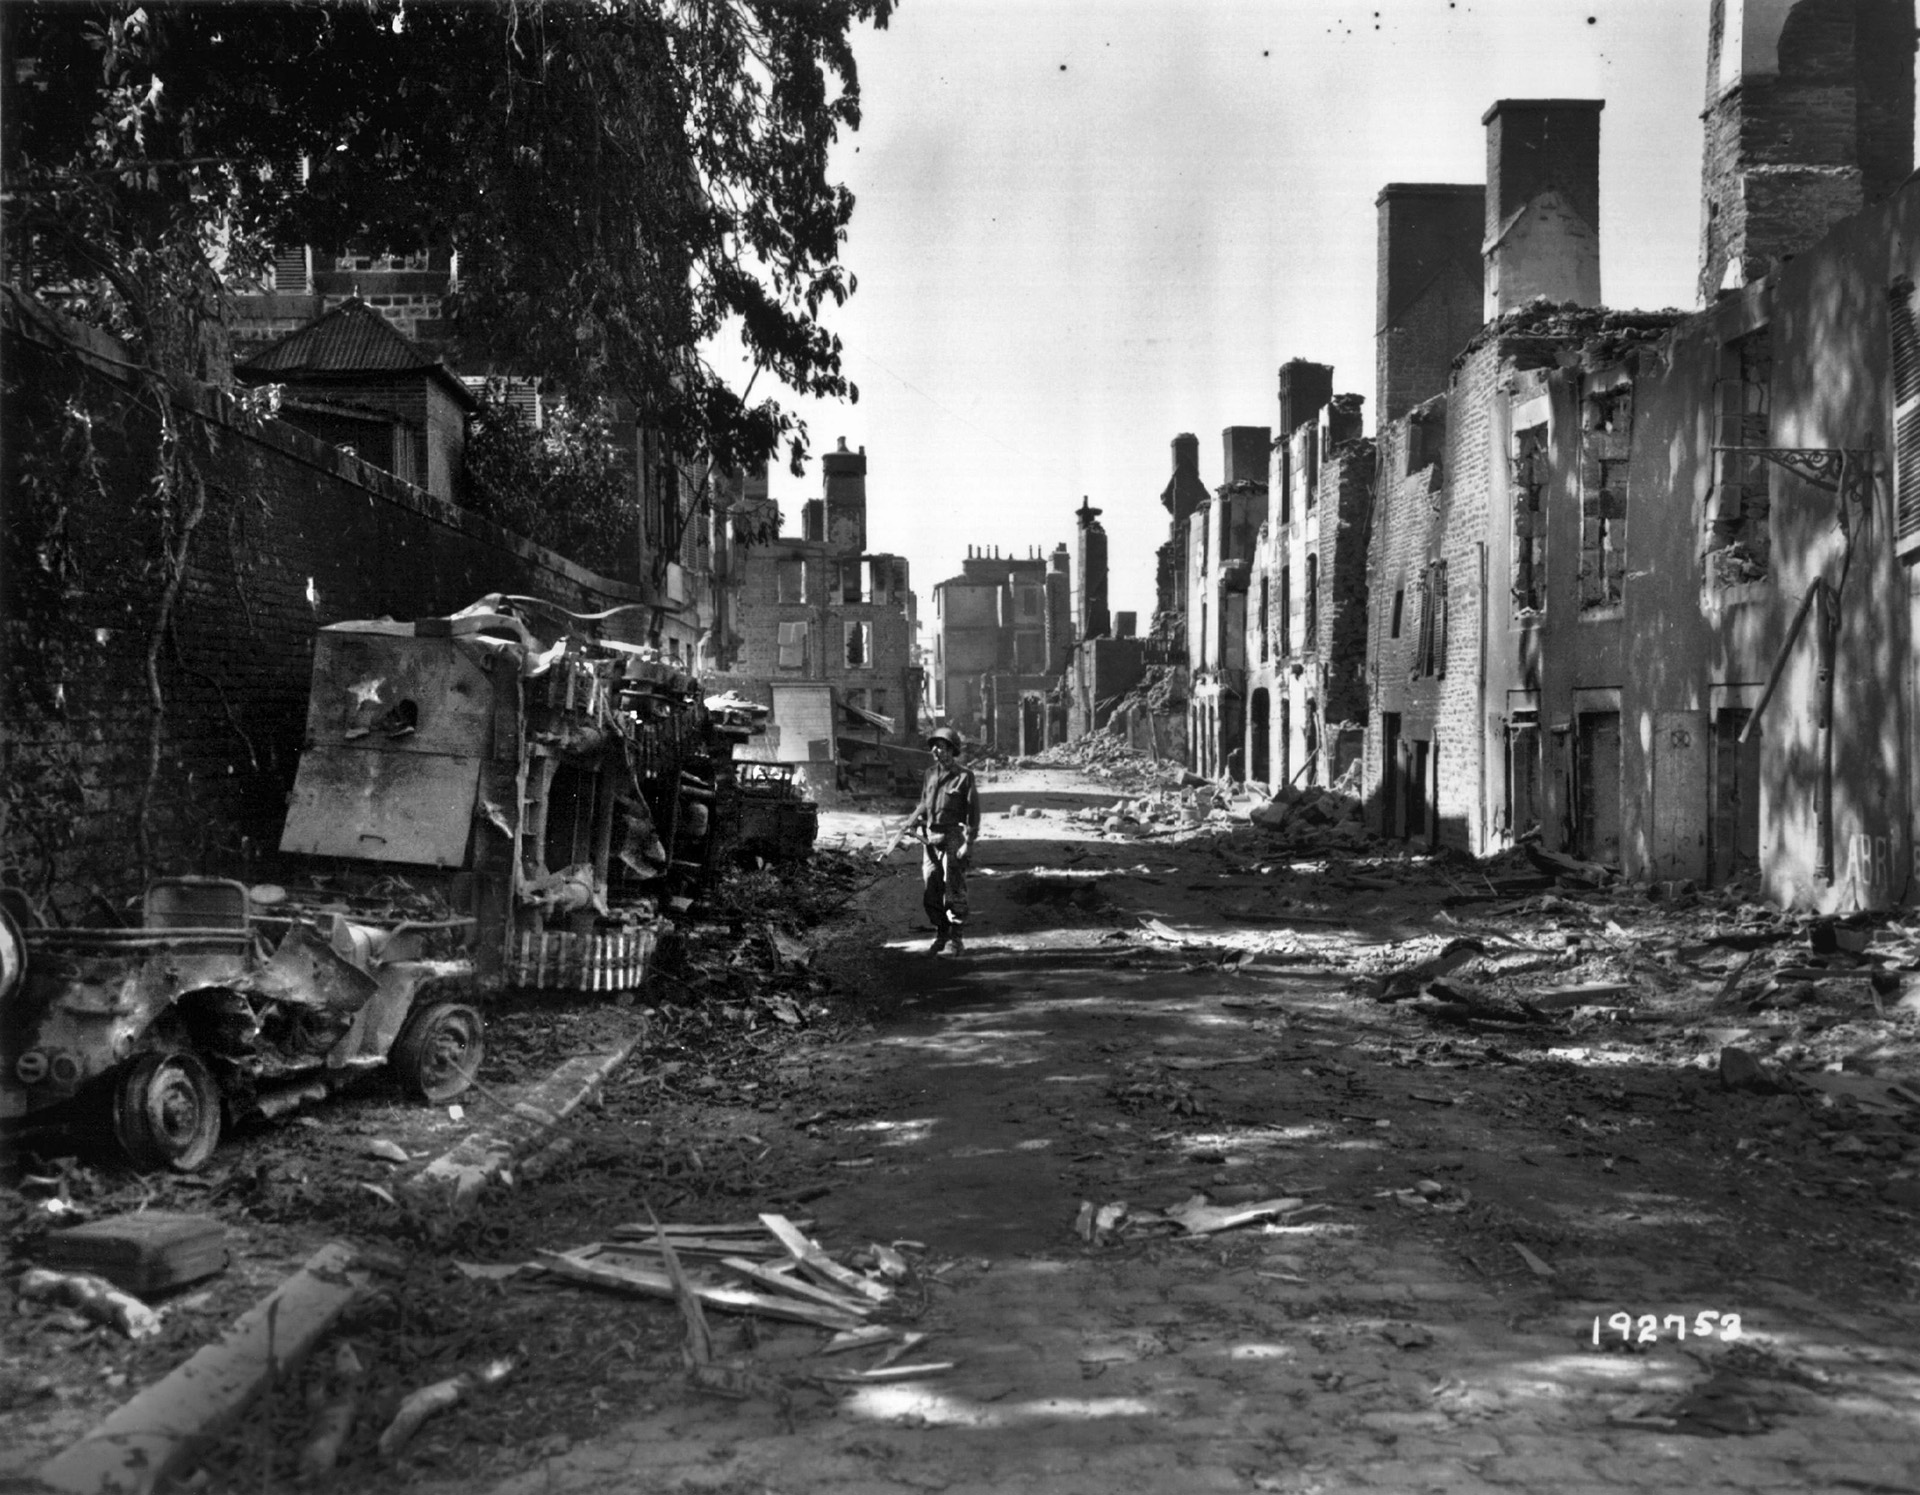 A GI on the La Grande Rue, Mortain's main street, looks at destroyed American vehicles, August 12, 1944.